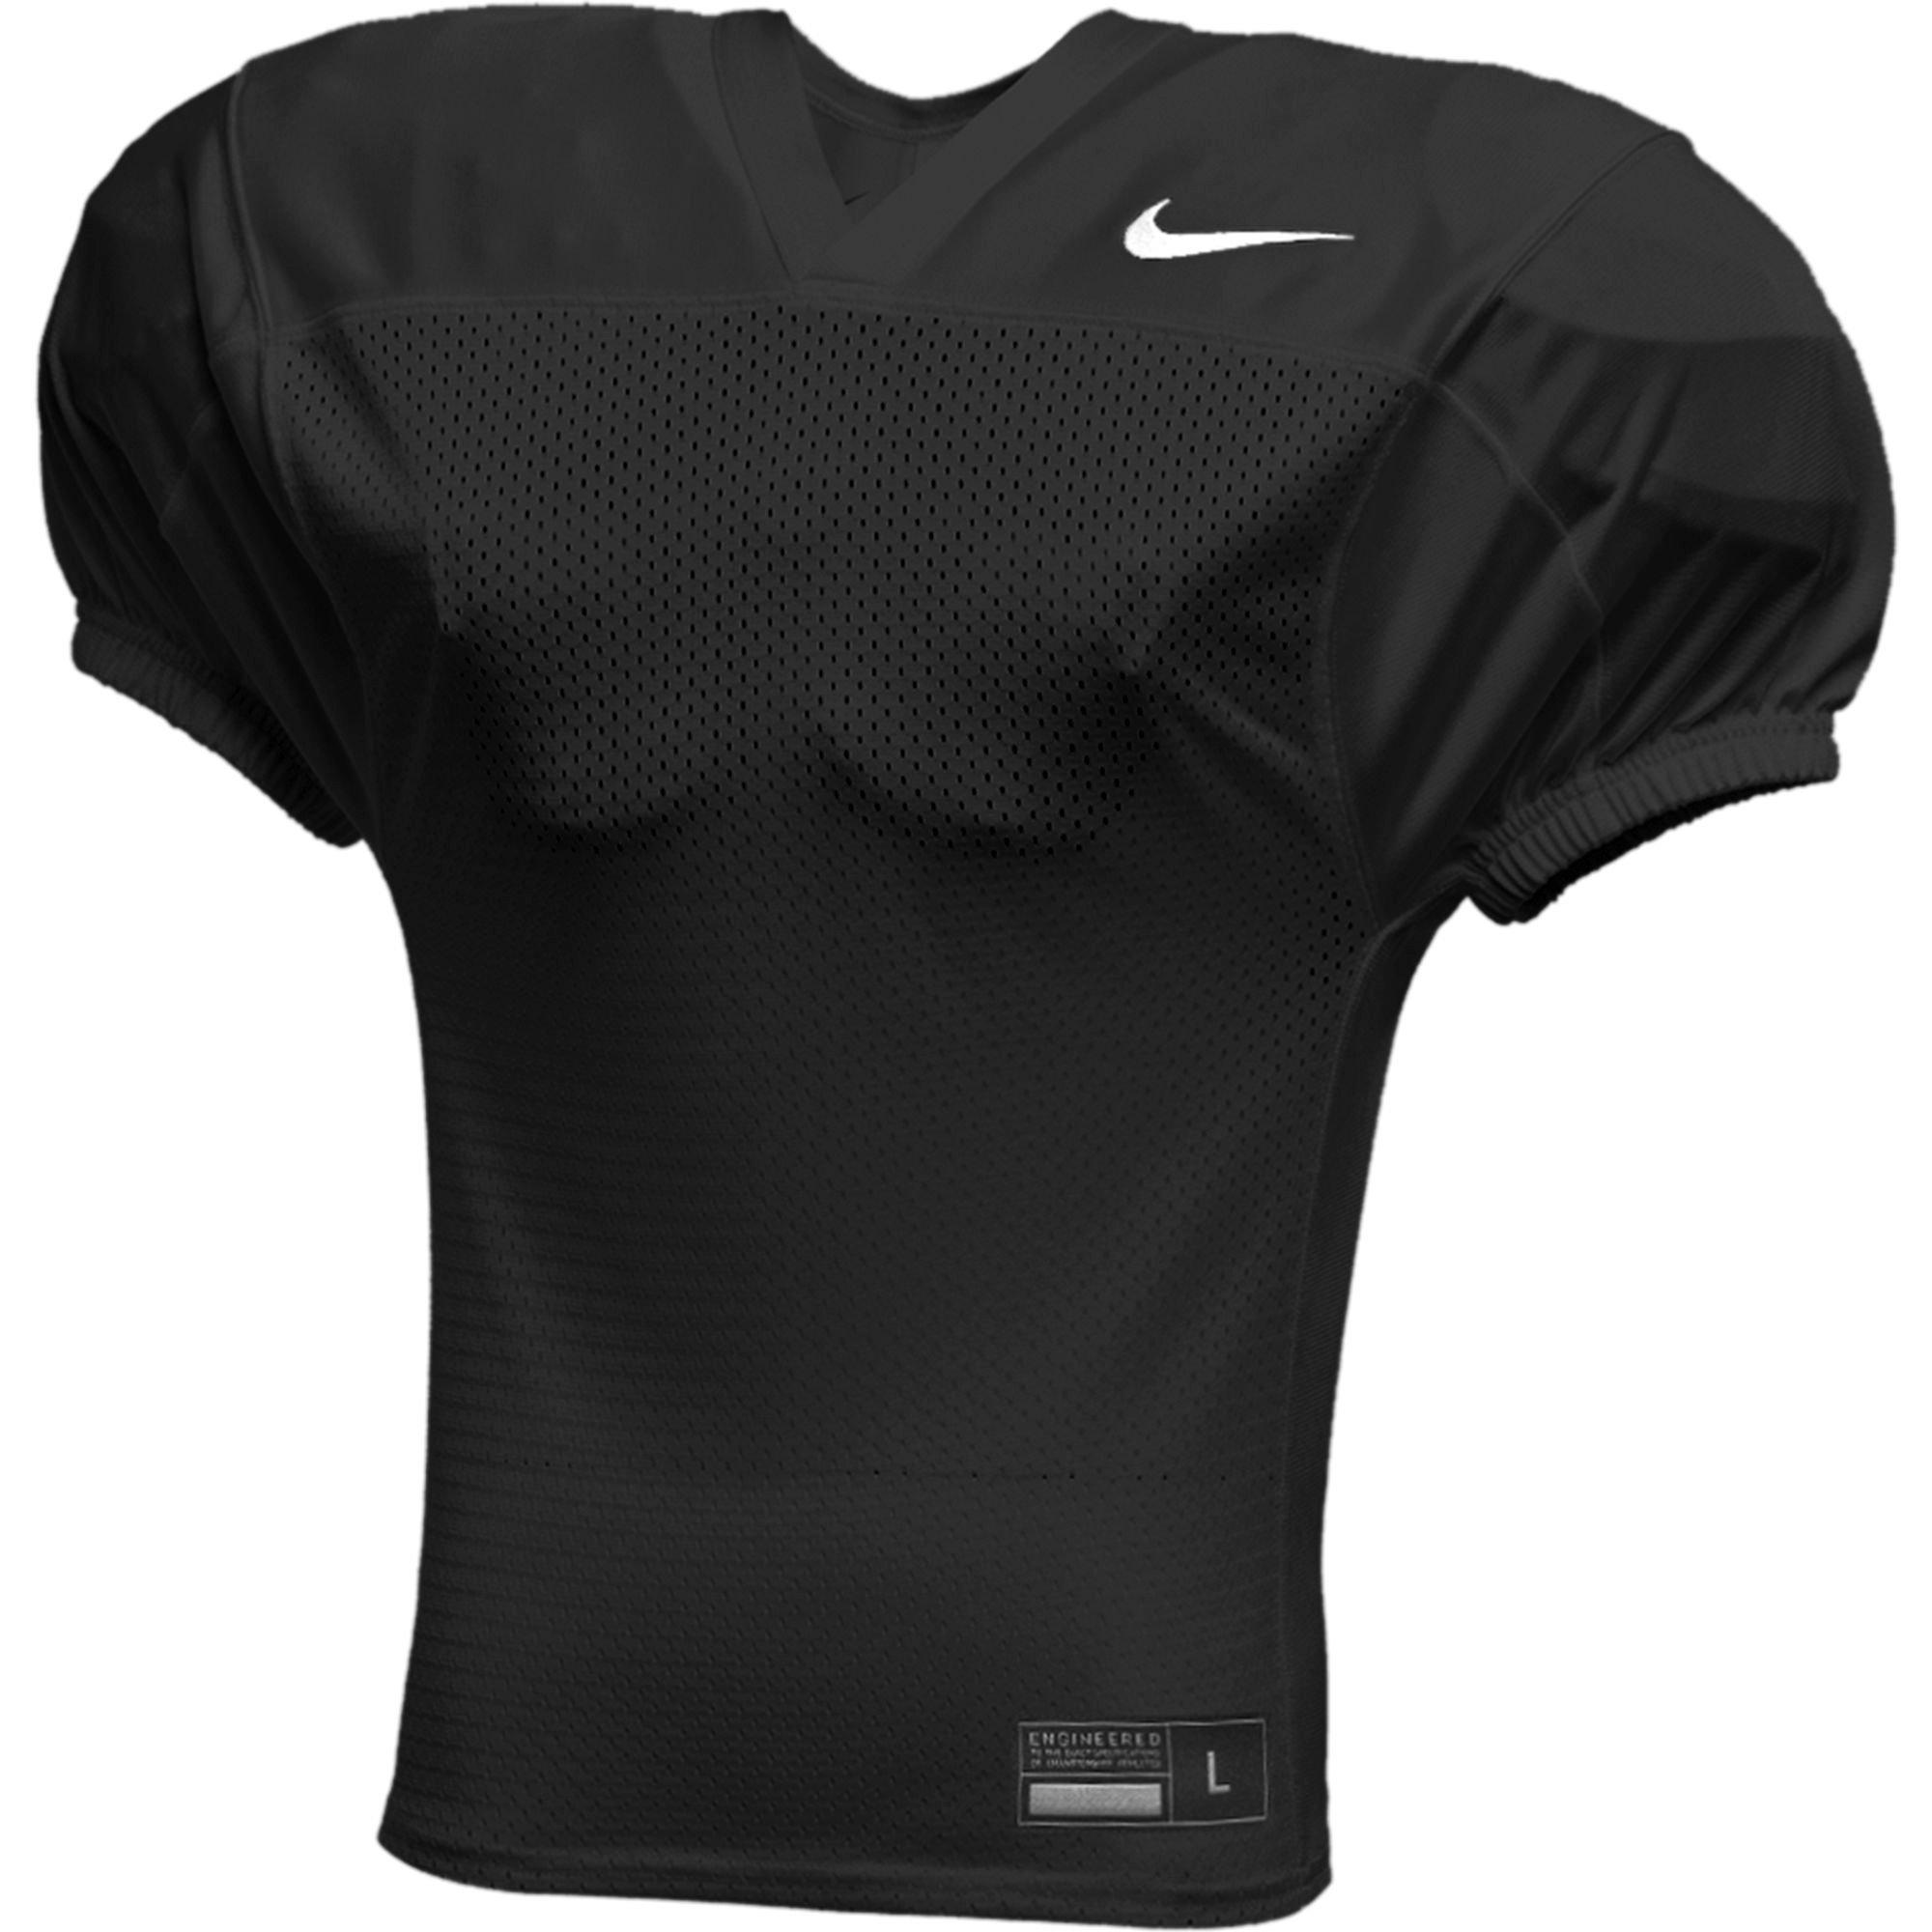 Nike Youth Football Practice Jersey - Youth XL - Black - Excellent Condition